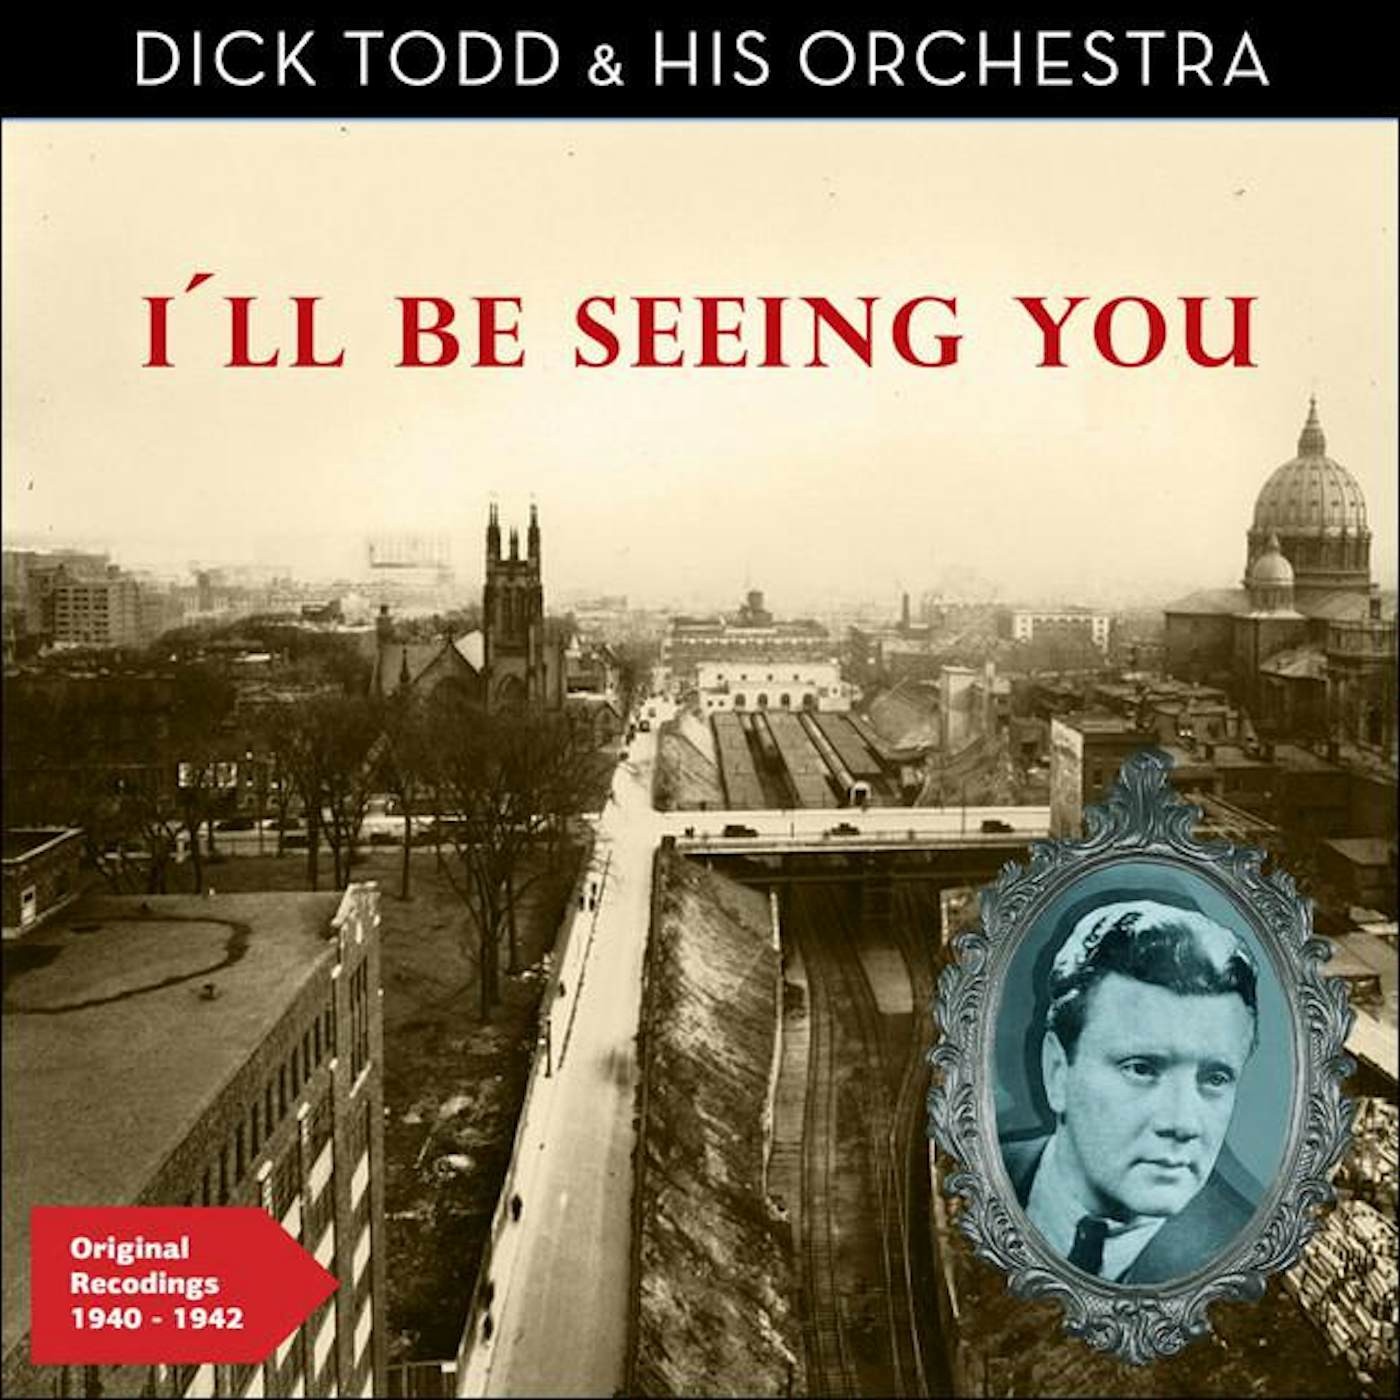 Dick Todd & His Orchestra